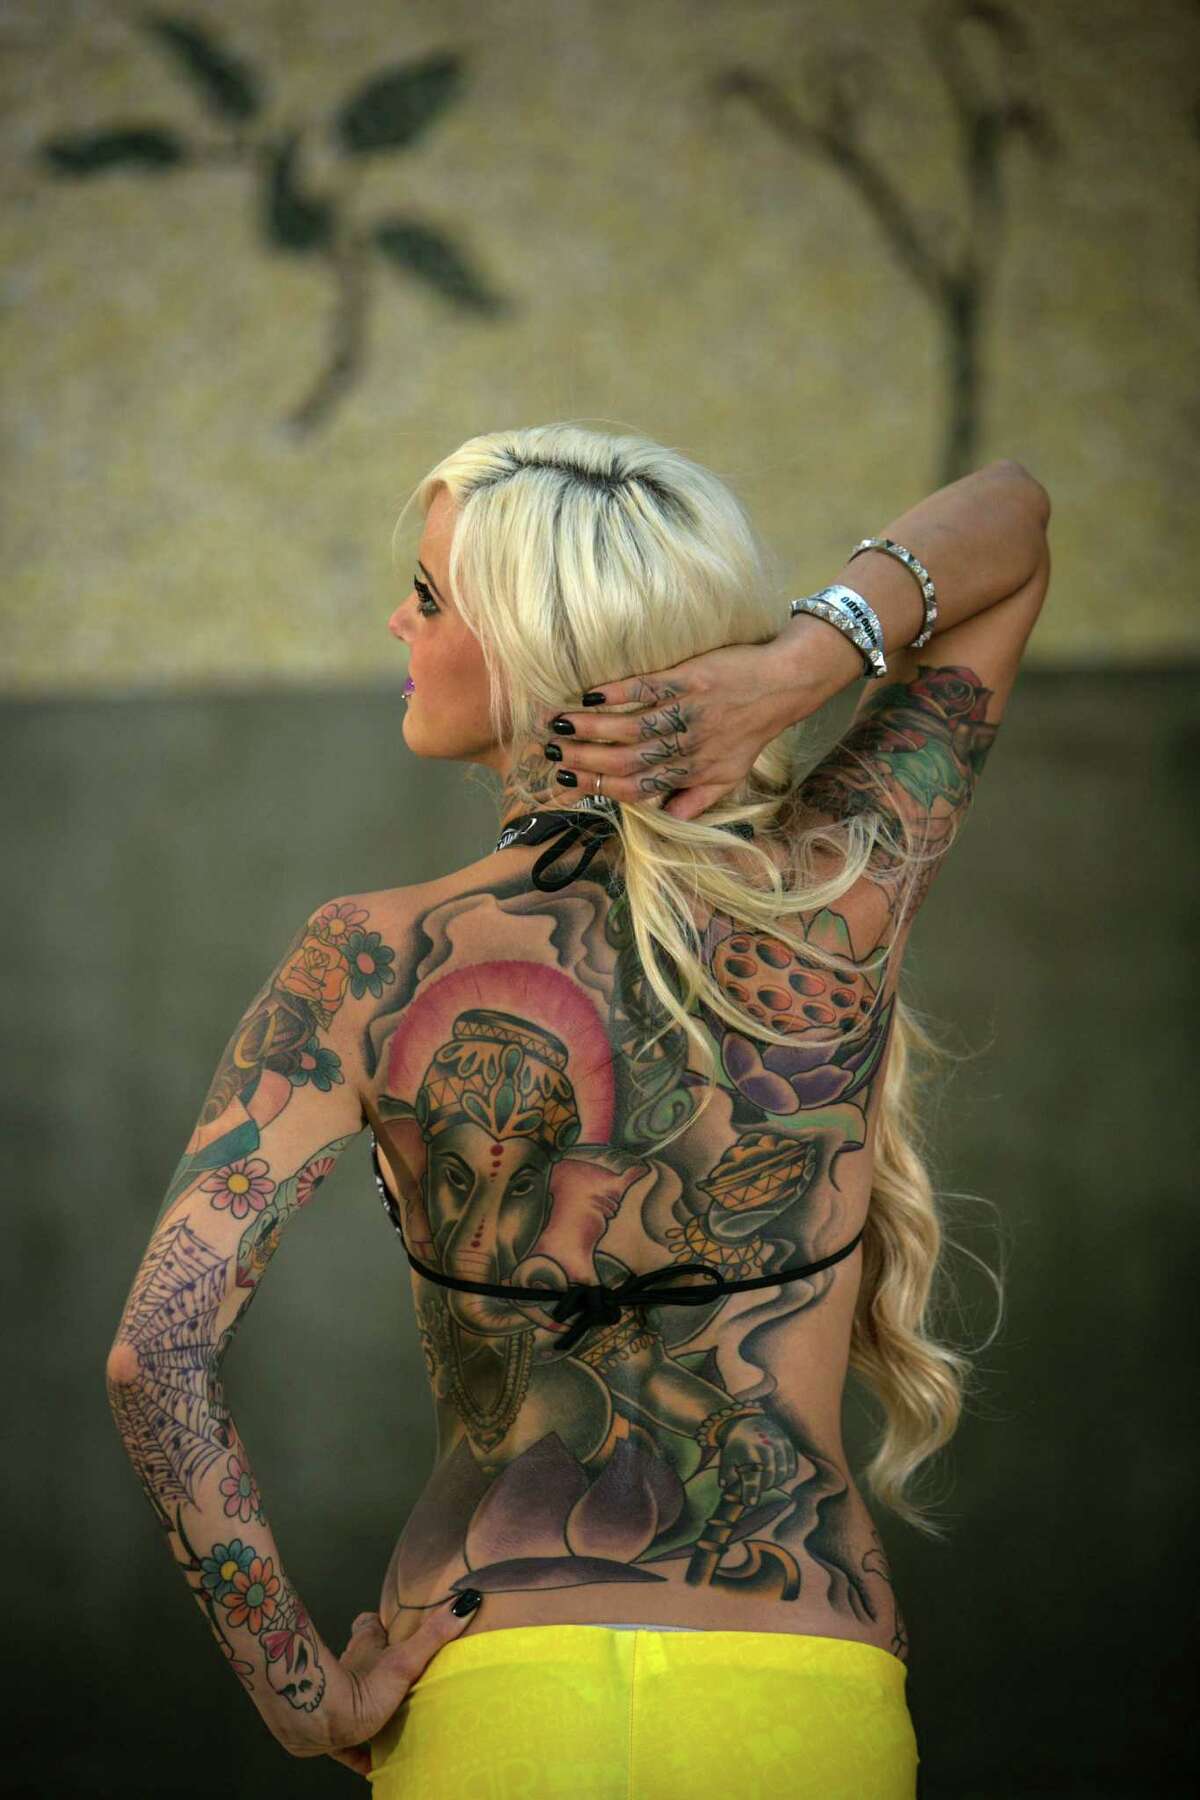 Erin shows her ink during the 13th annual Seattle Tattoo Expo at Fisher Pavilion at the Seattle Center. Photographed on Sunday, August 17, 2014.